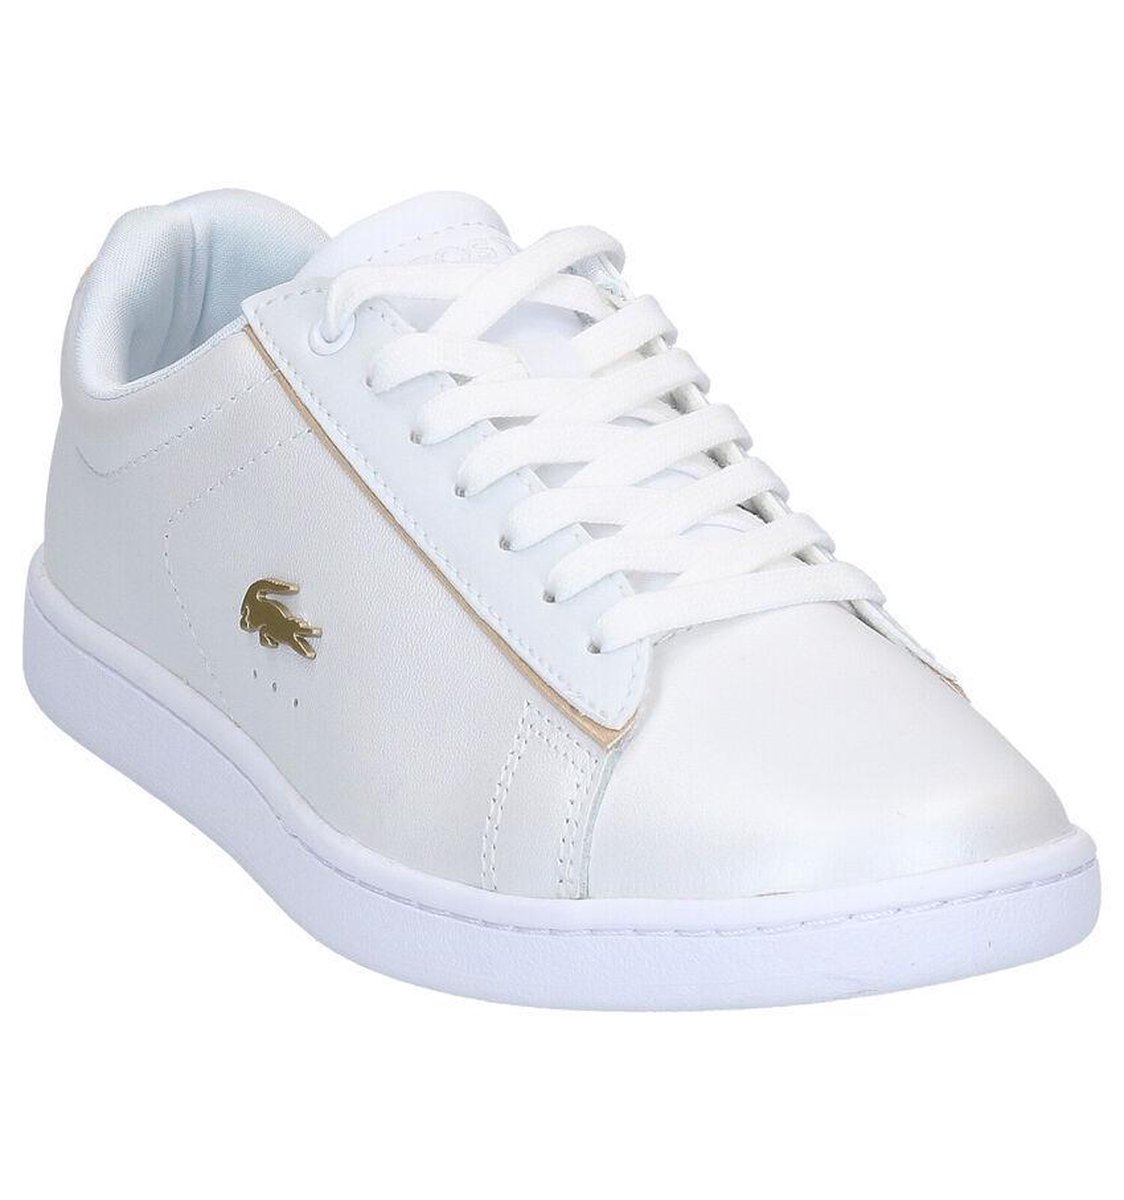 Lacoste Carnaby Evo Witte Sneakers Dames 42 | bol.com